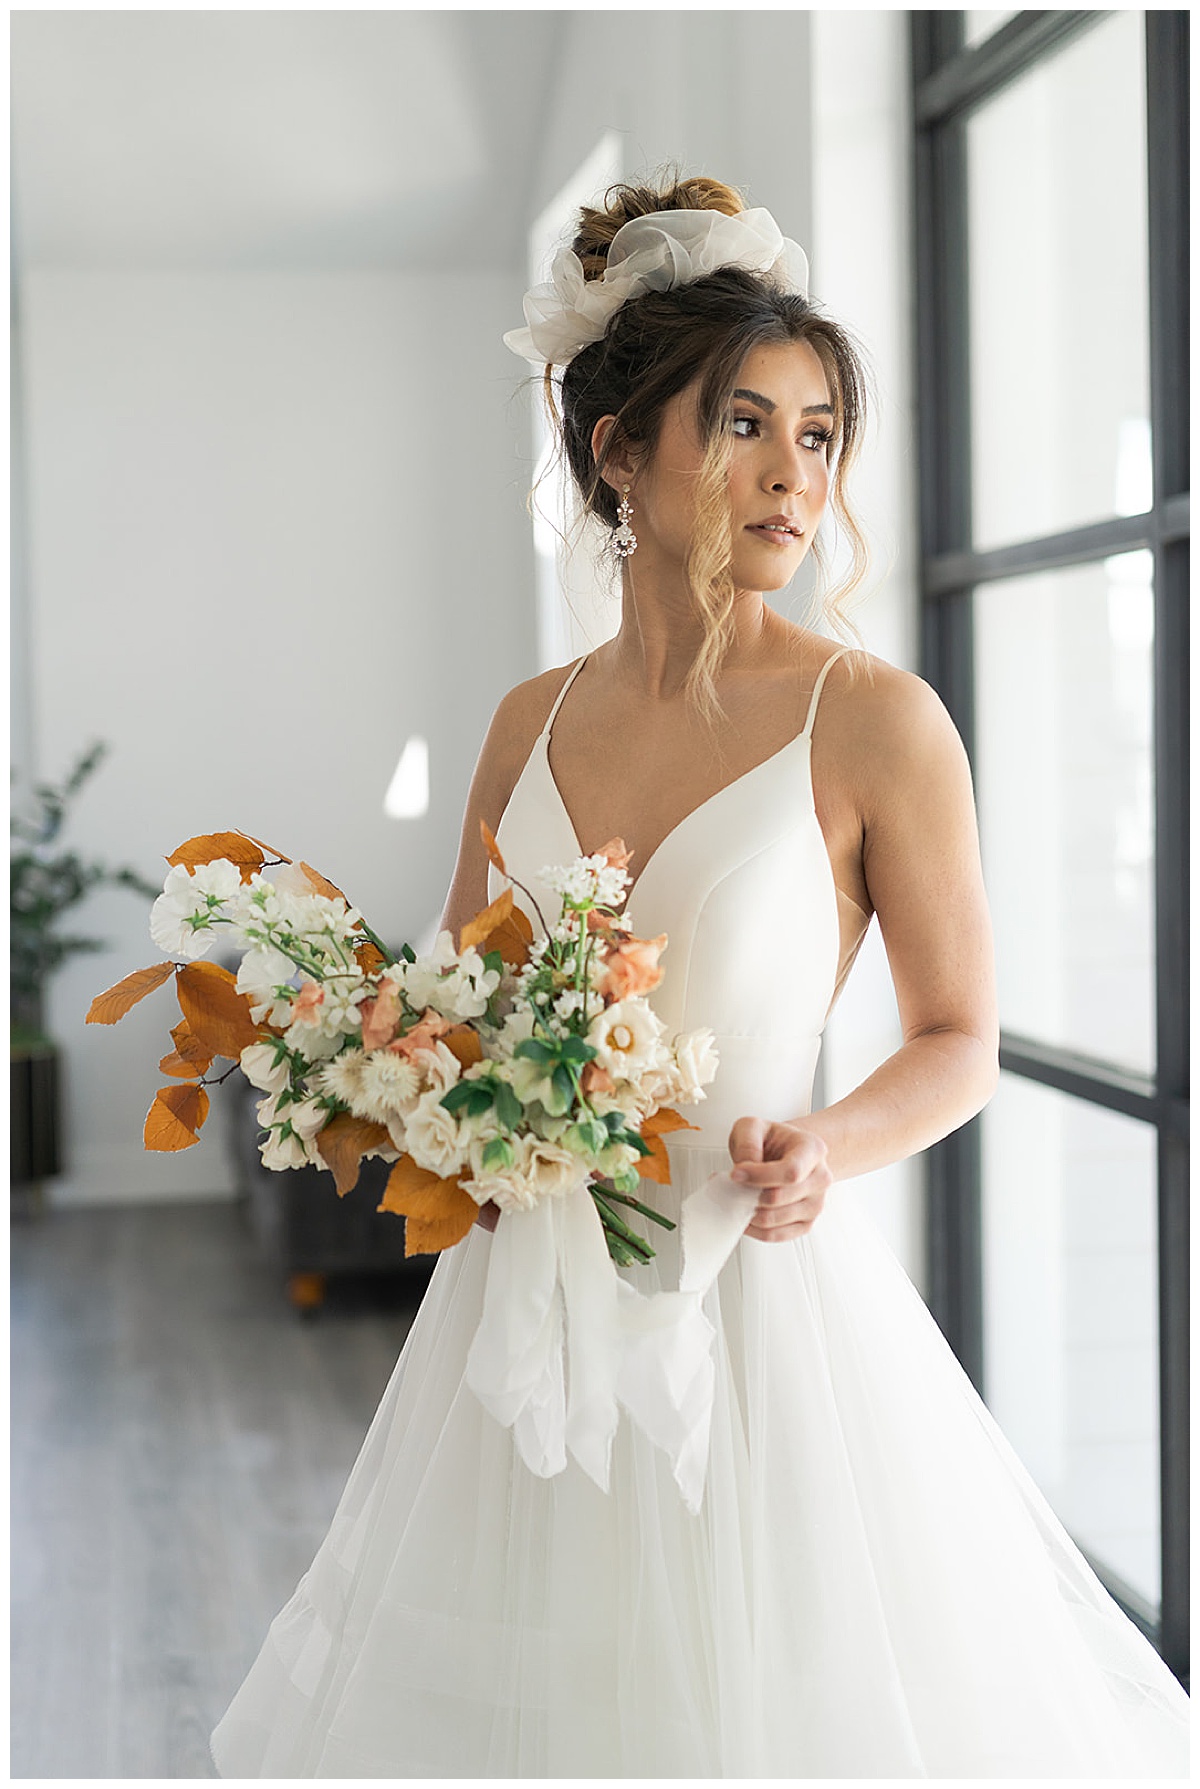 Stunning woman with gorgeous bridal bouquet at Boxwood Manor